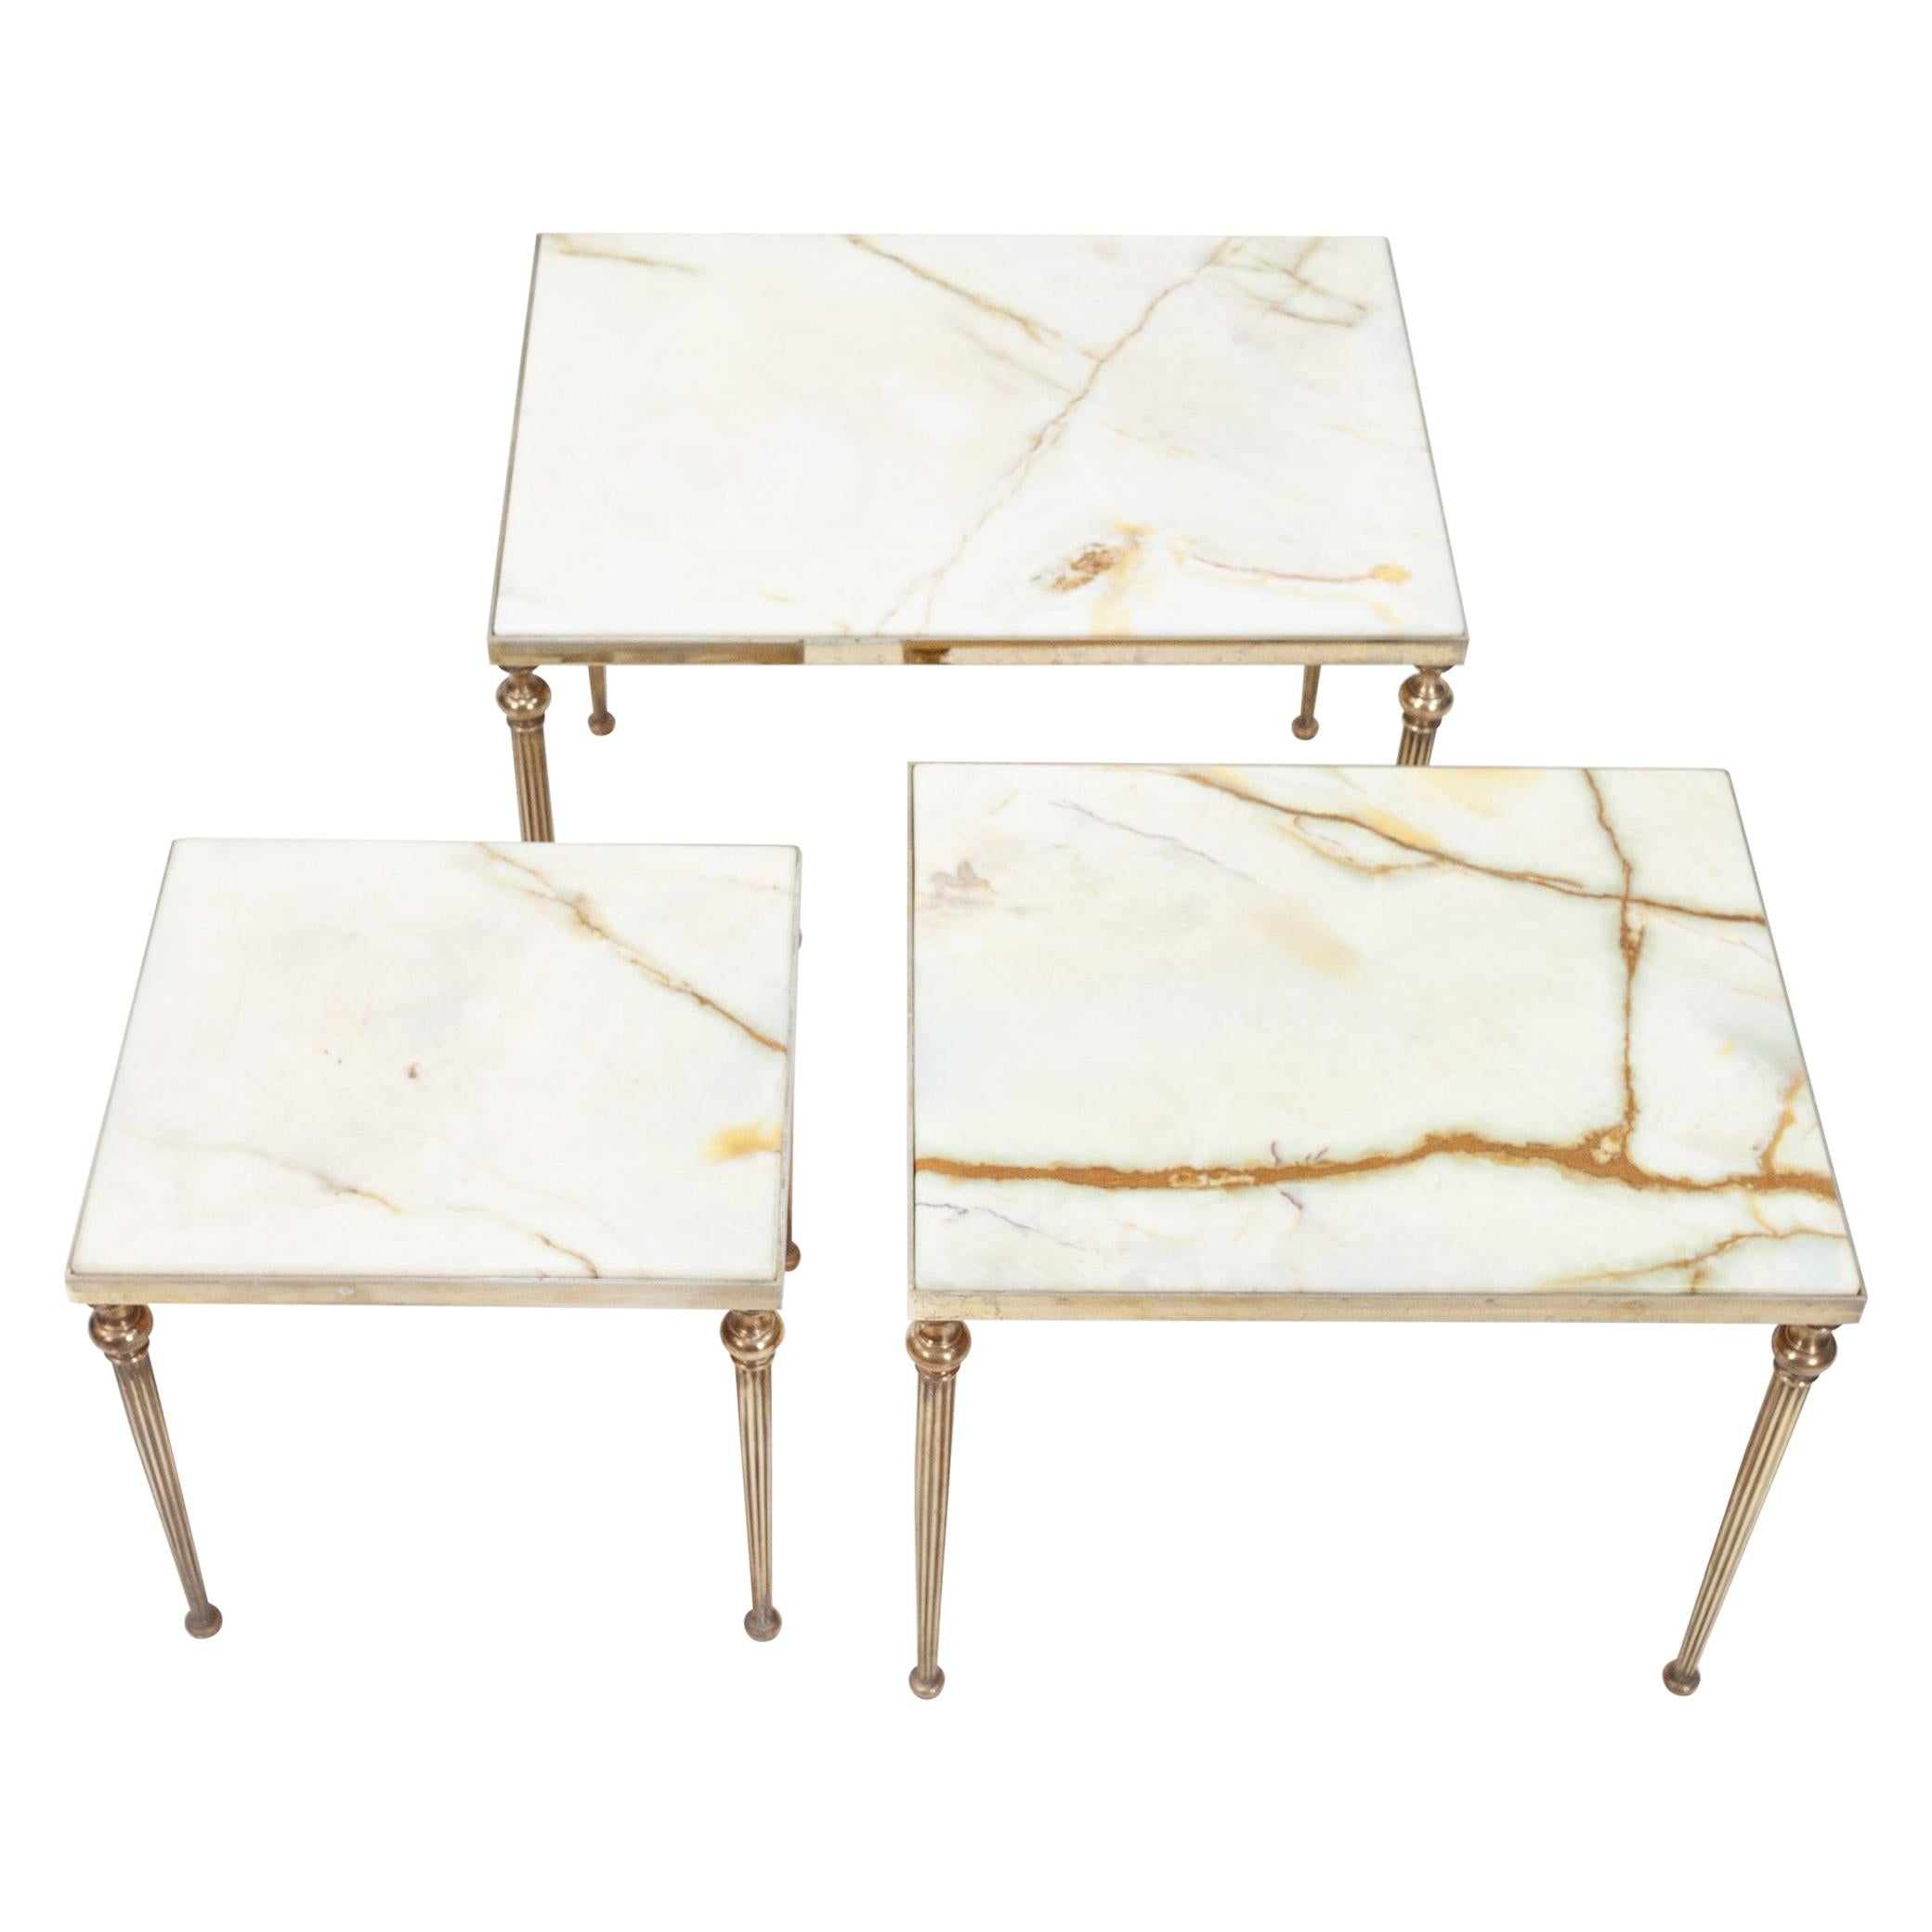 Maison Jansen Brass and Marble Nesting Tables, 1950s